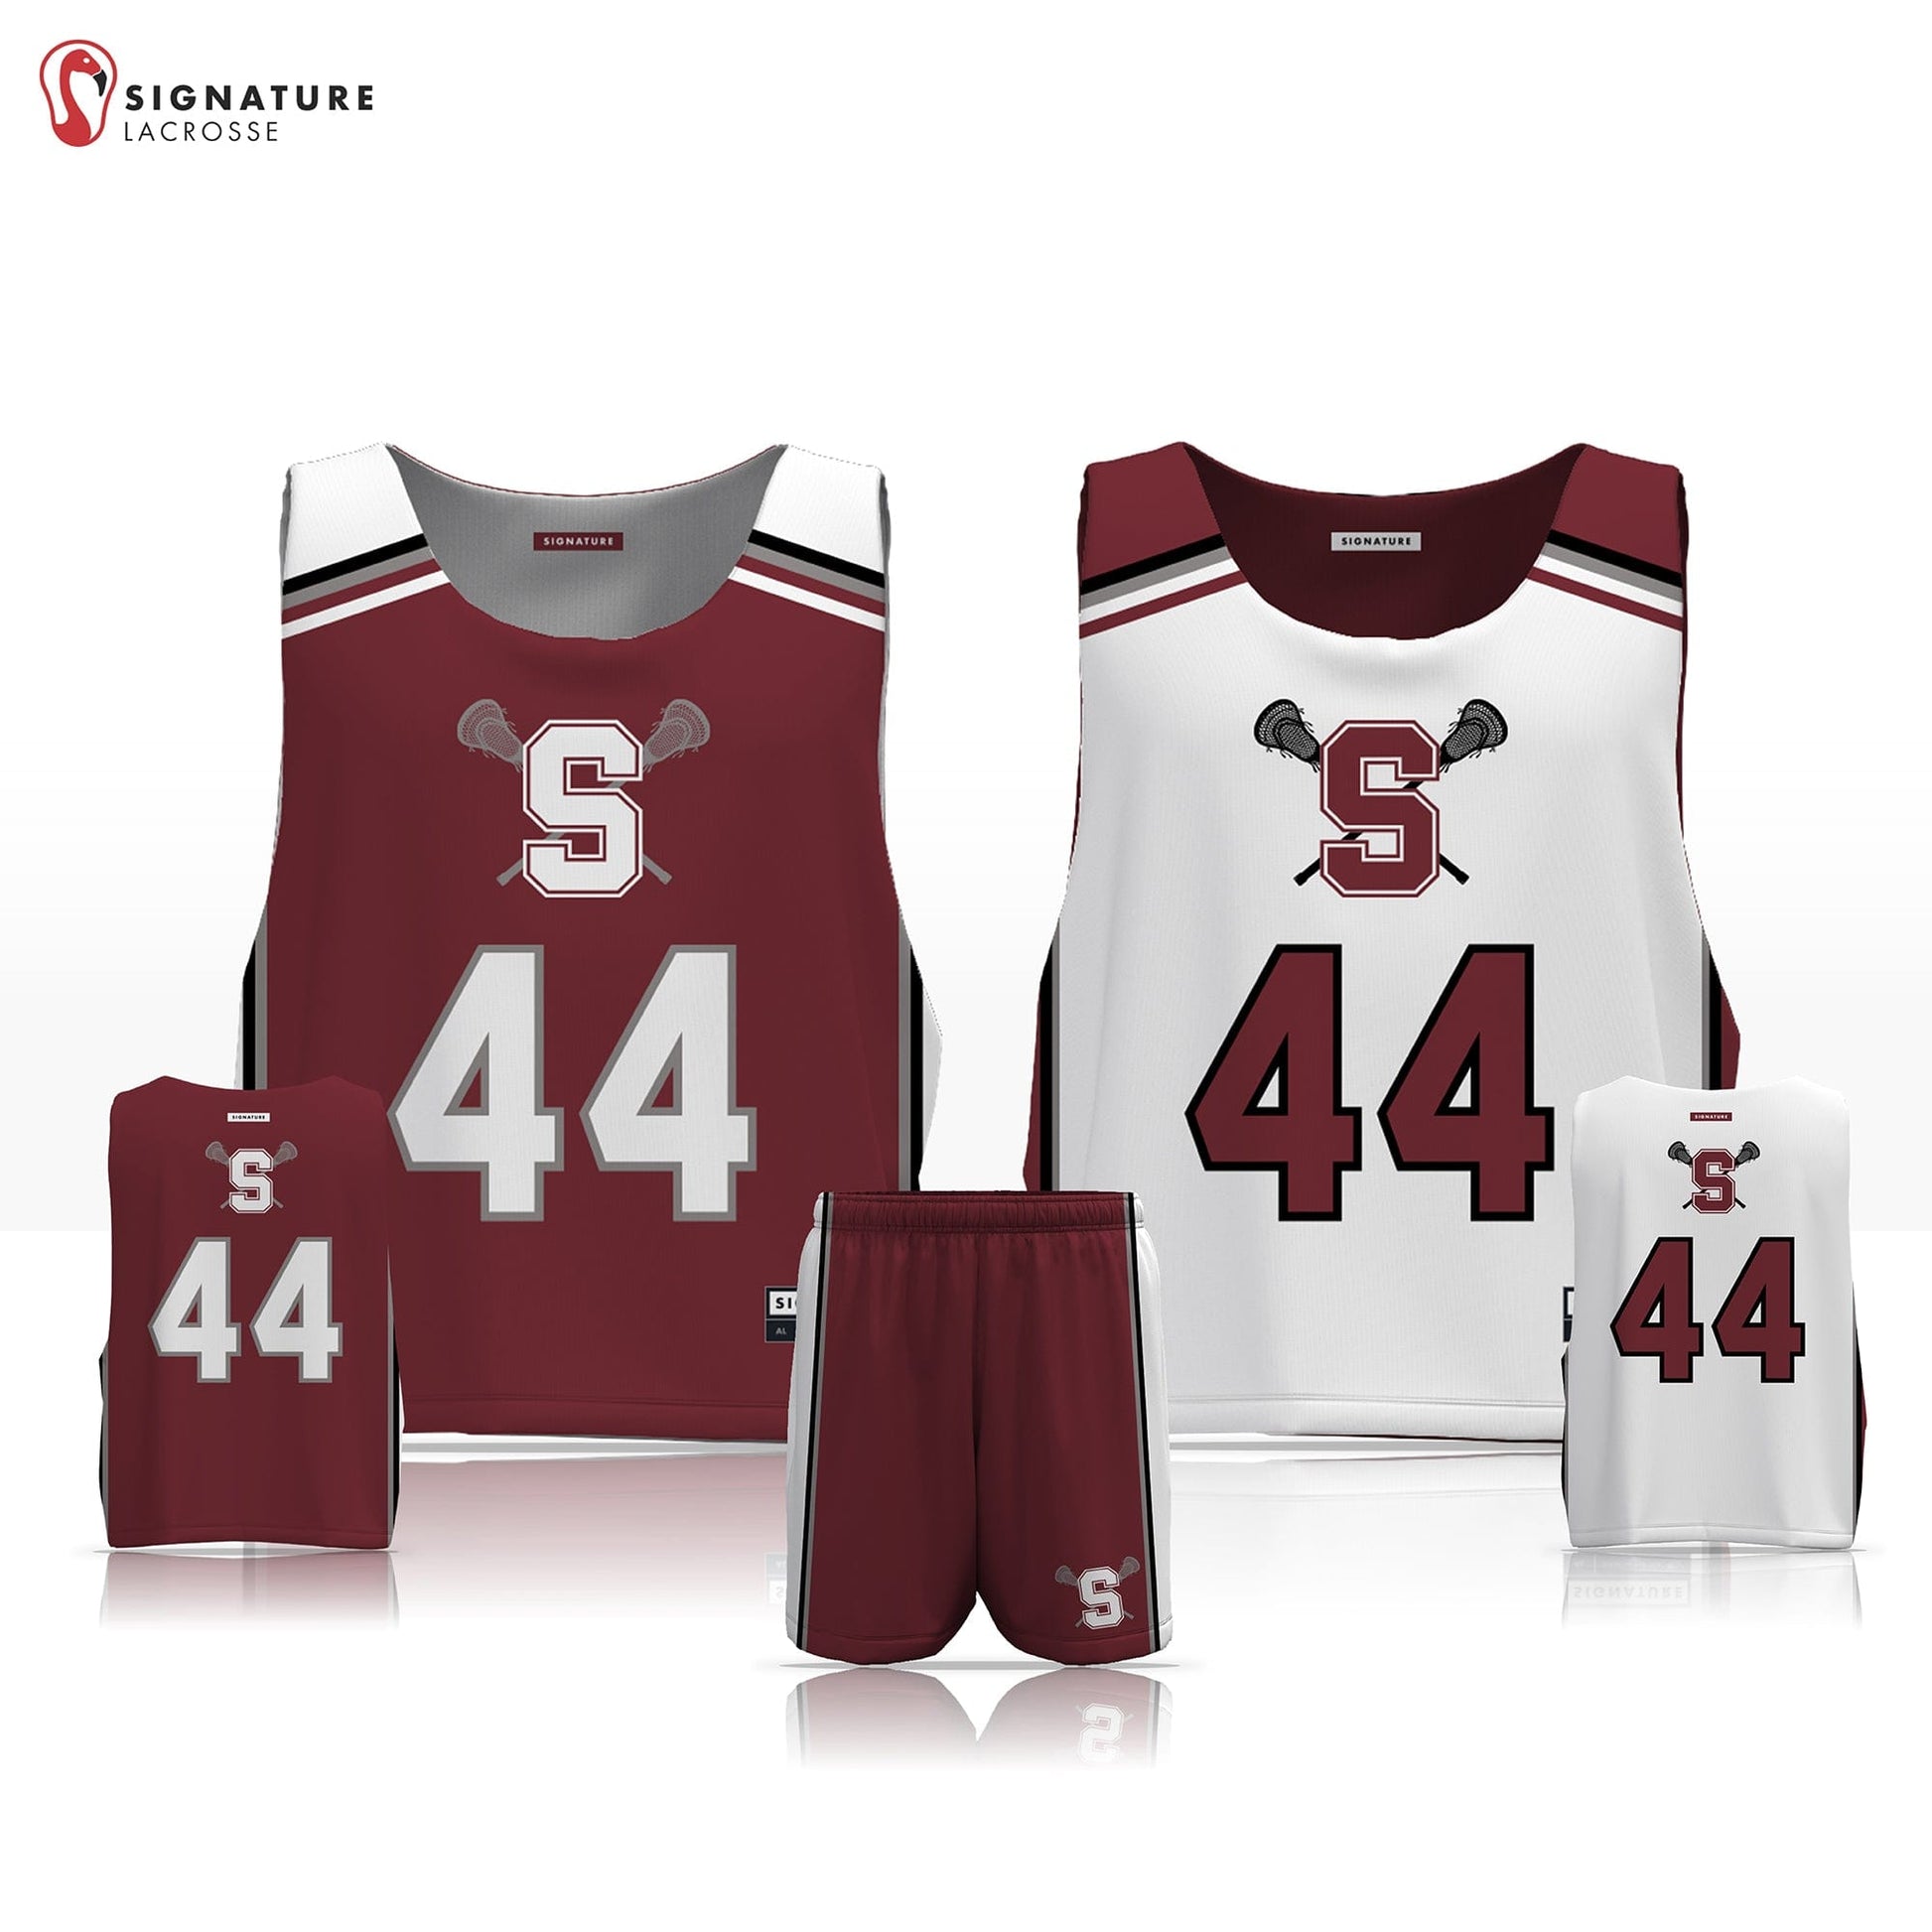 State College Men's 2 Piece Player Game Package: 3-4 Signature Lacrosse